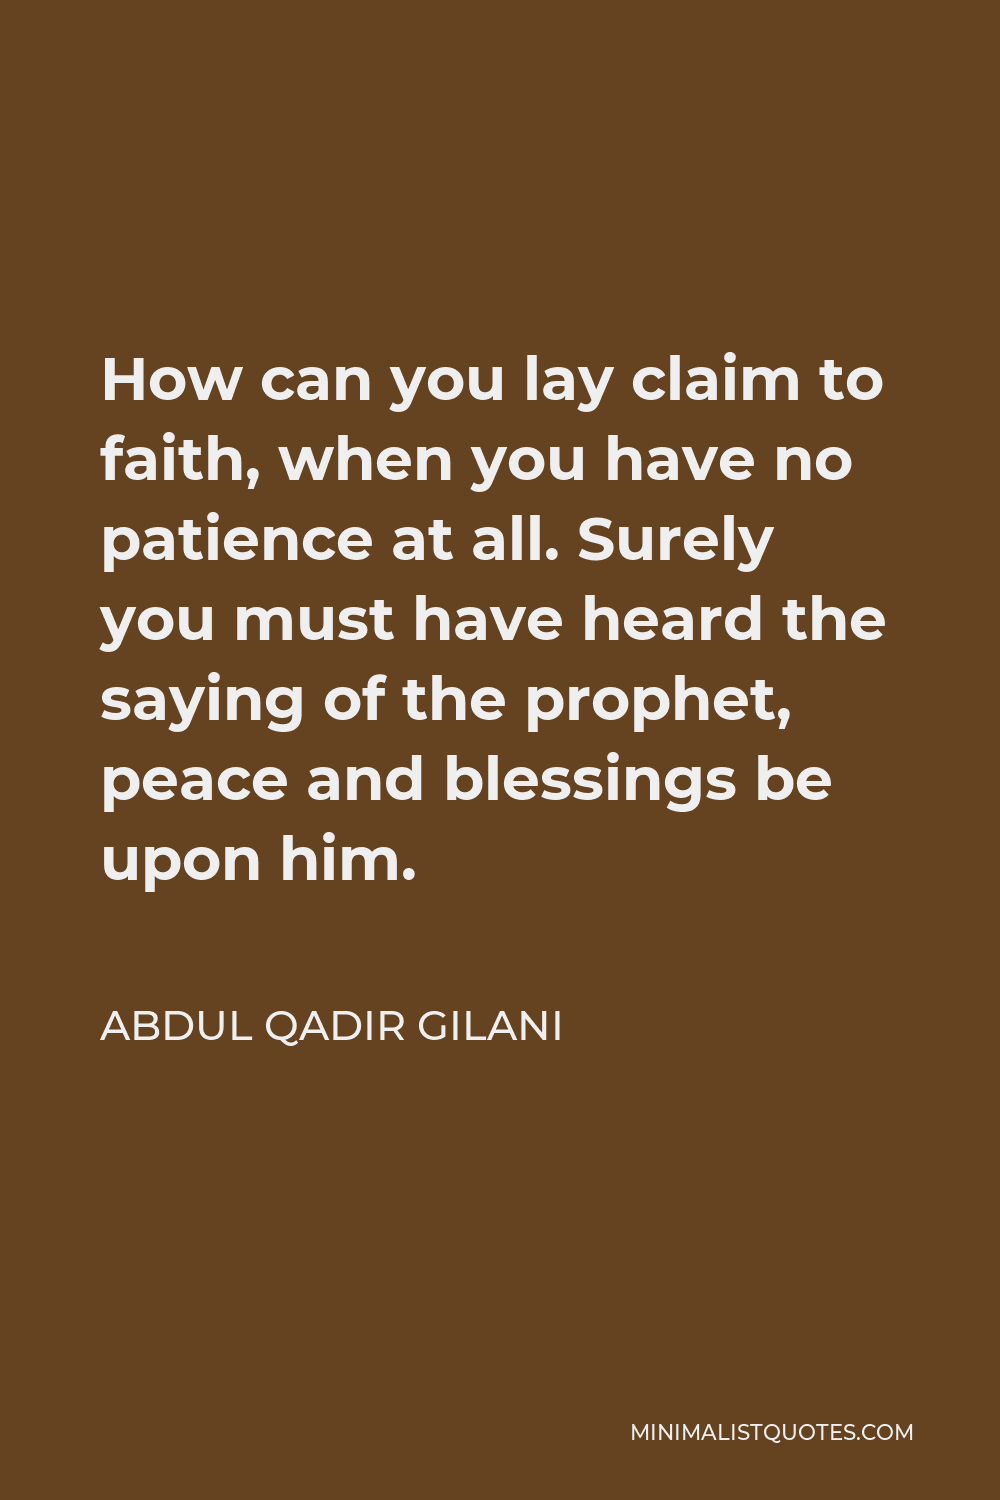 Abdul Qadir Gilani Quote - How can you lay claim to faith, when you have no patience at all. Surely you must have heard the saying of the prophet, peace and blessings be upon him.